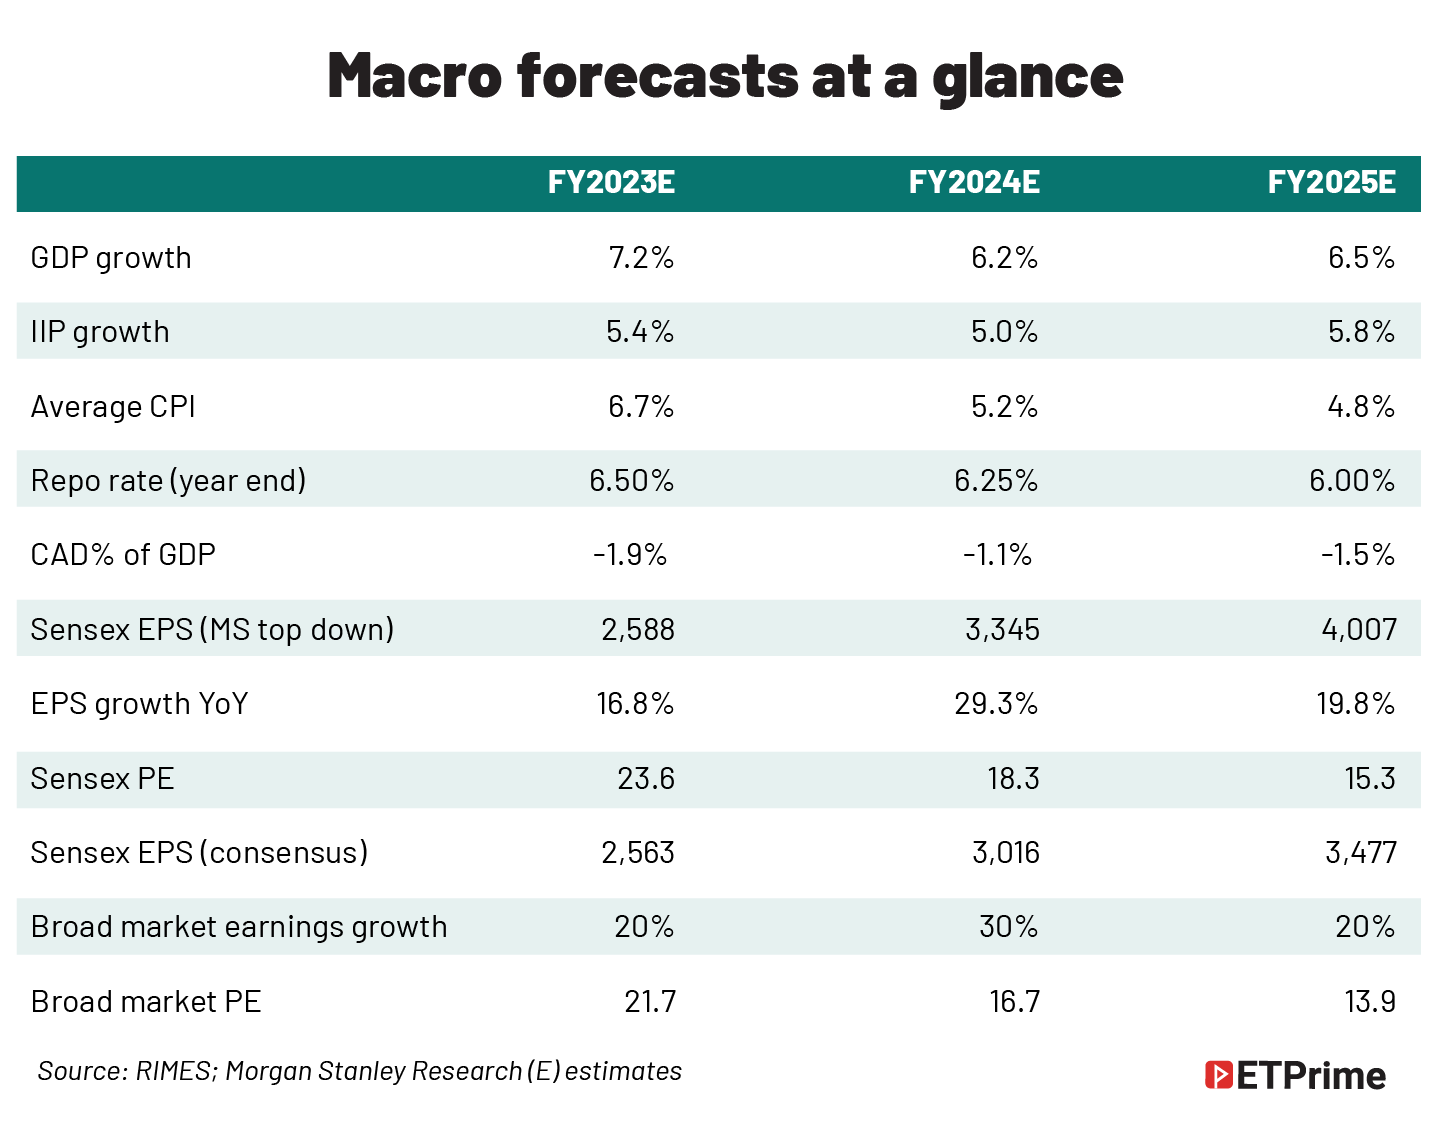 Macro forecasts at a glance@2x